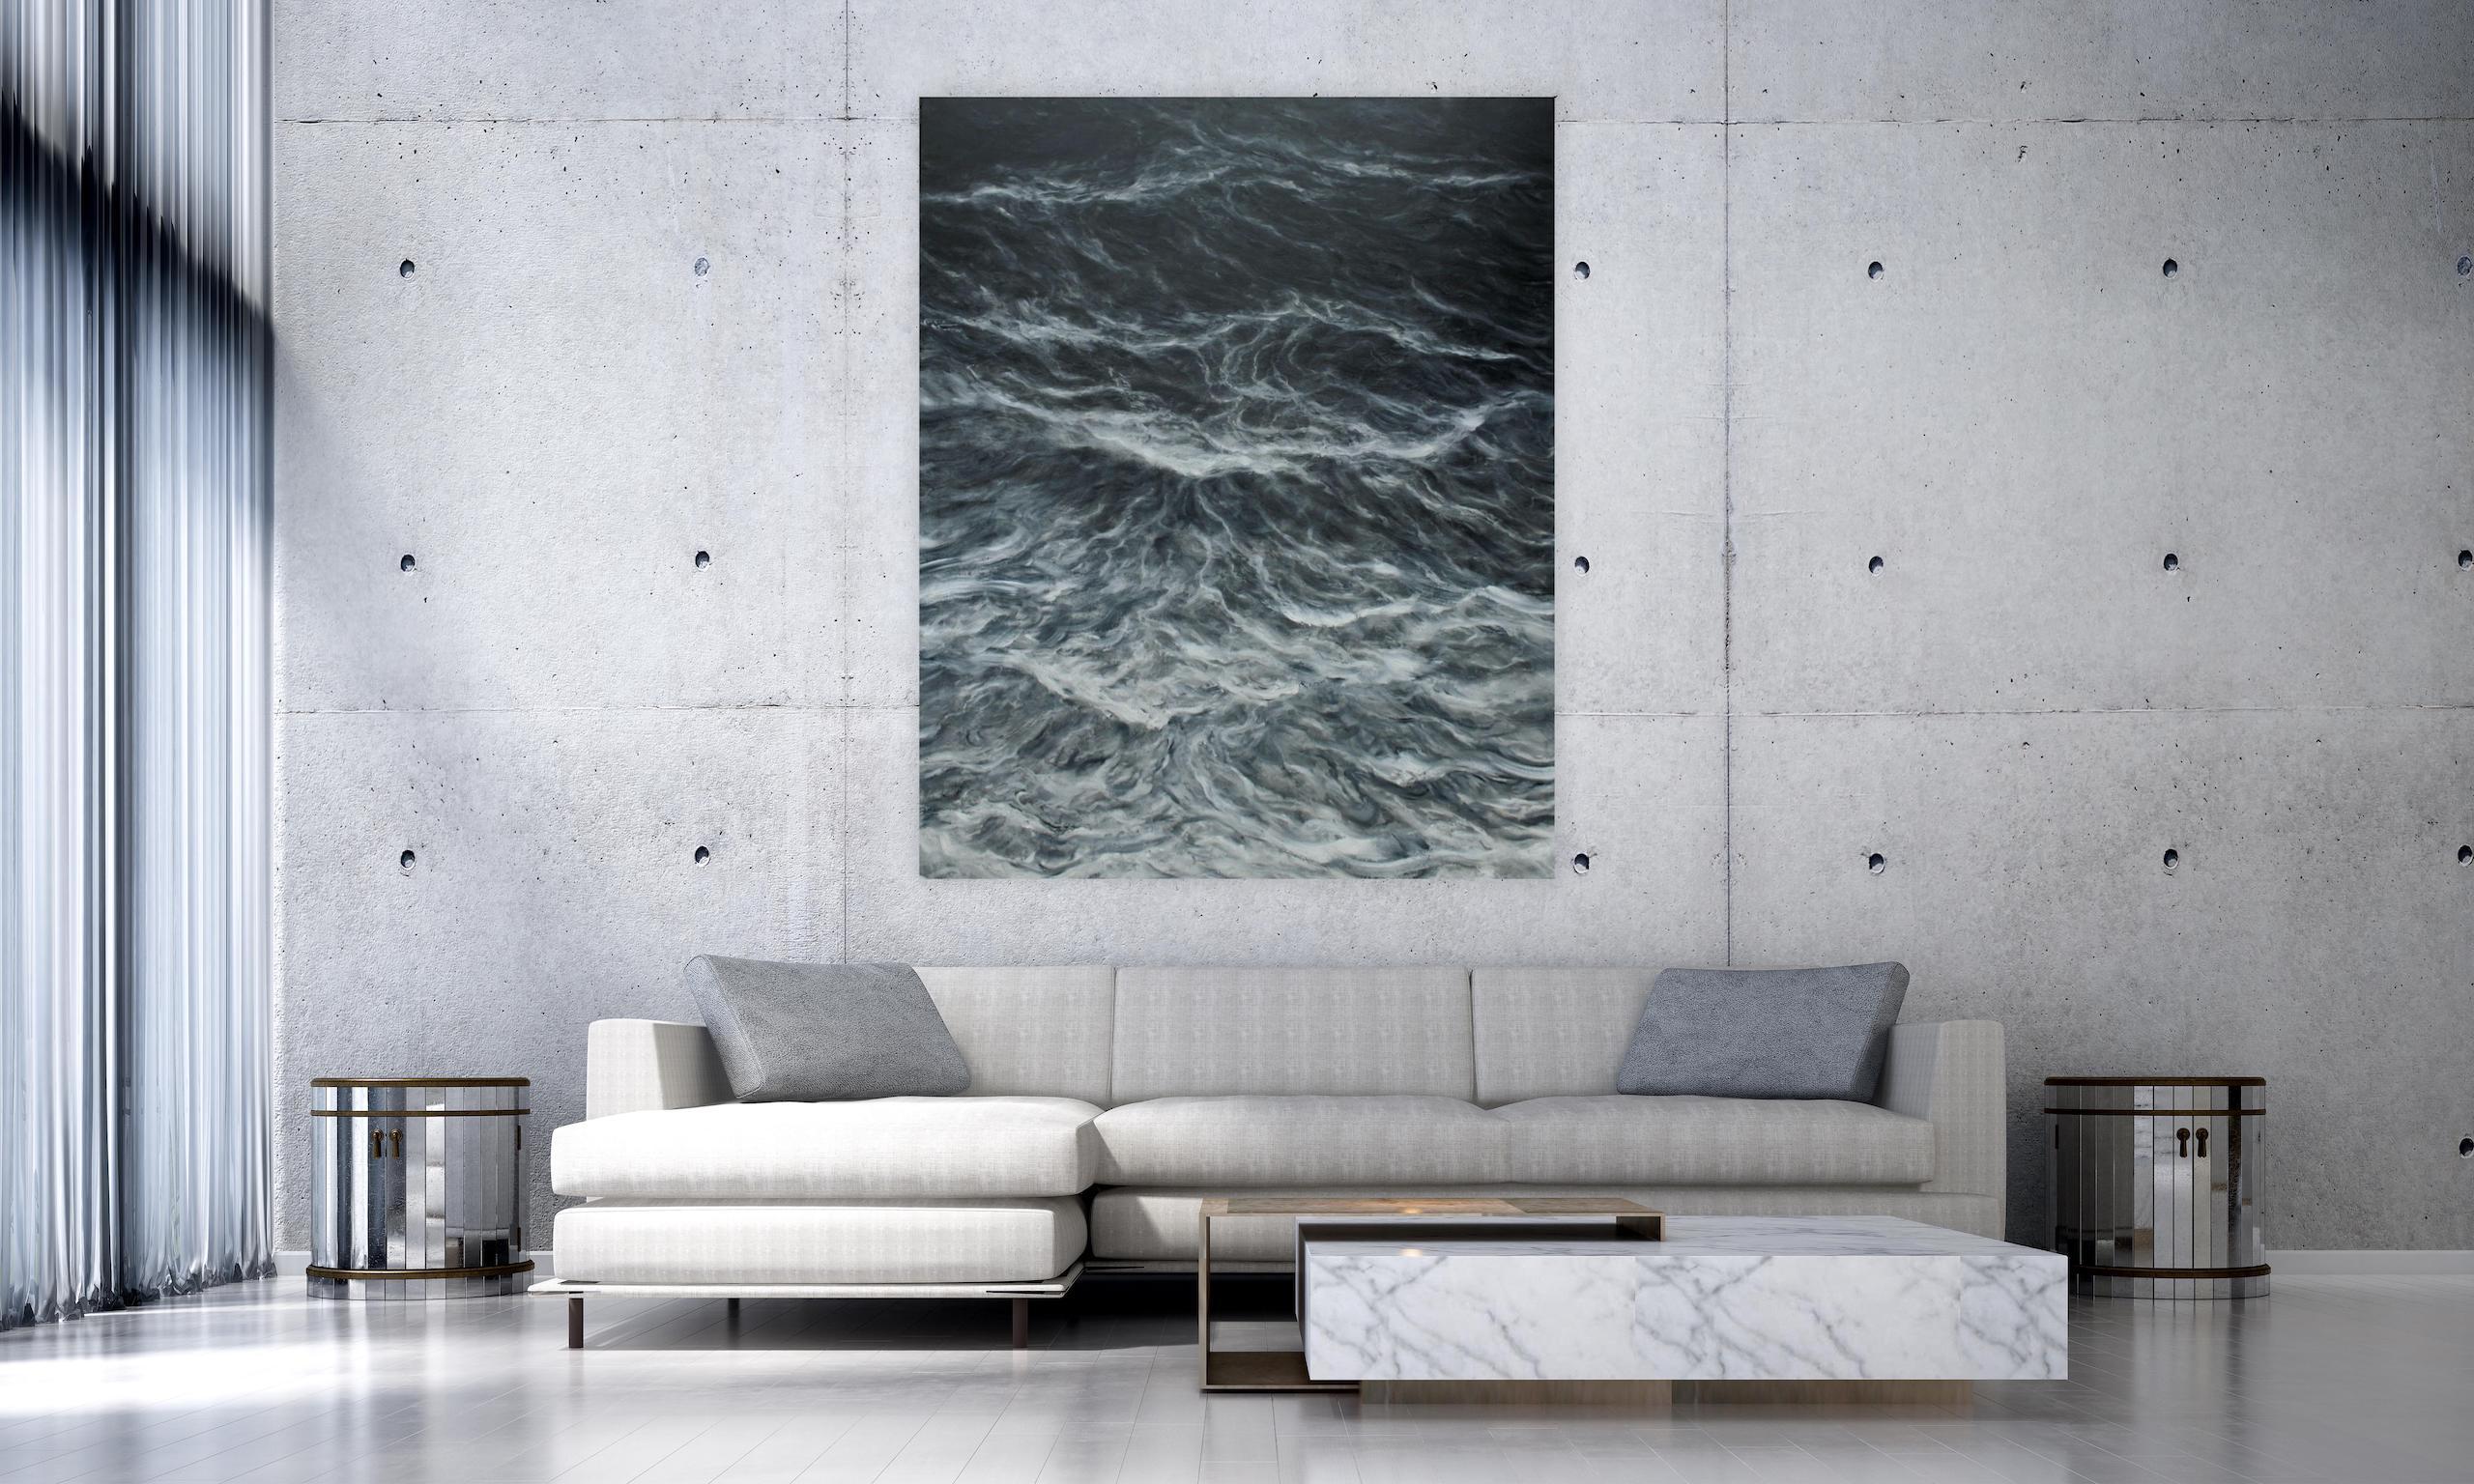 Abstract ocean by Franco Salas Borquez - Black & white painting, ocean waves For Sale 1